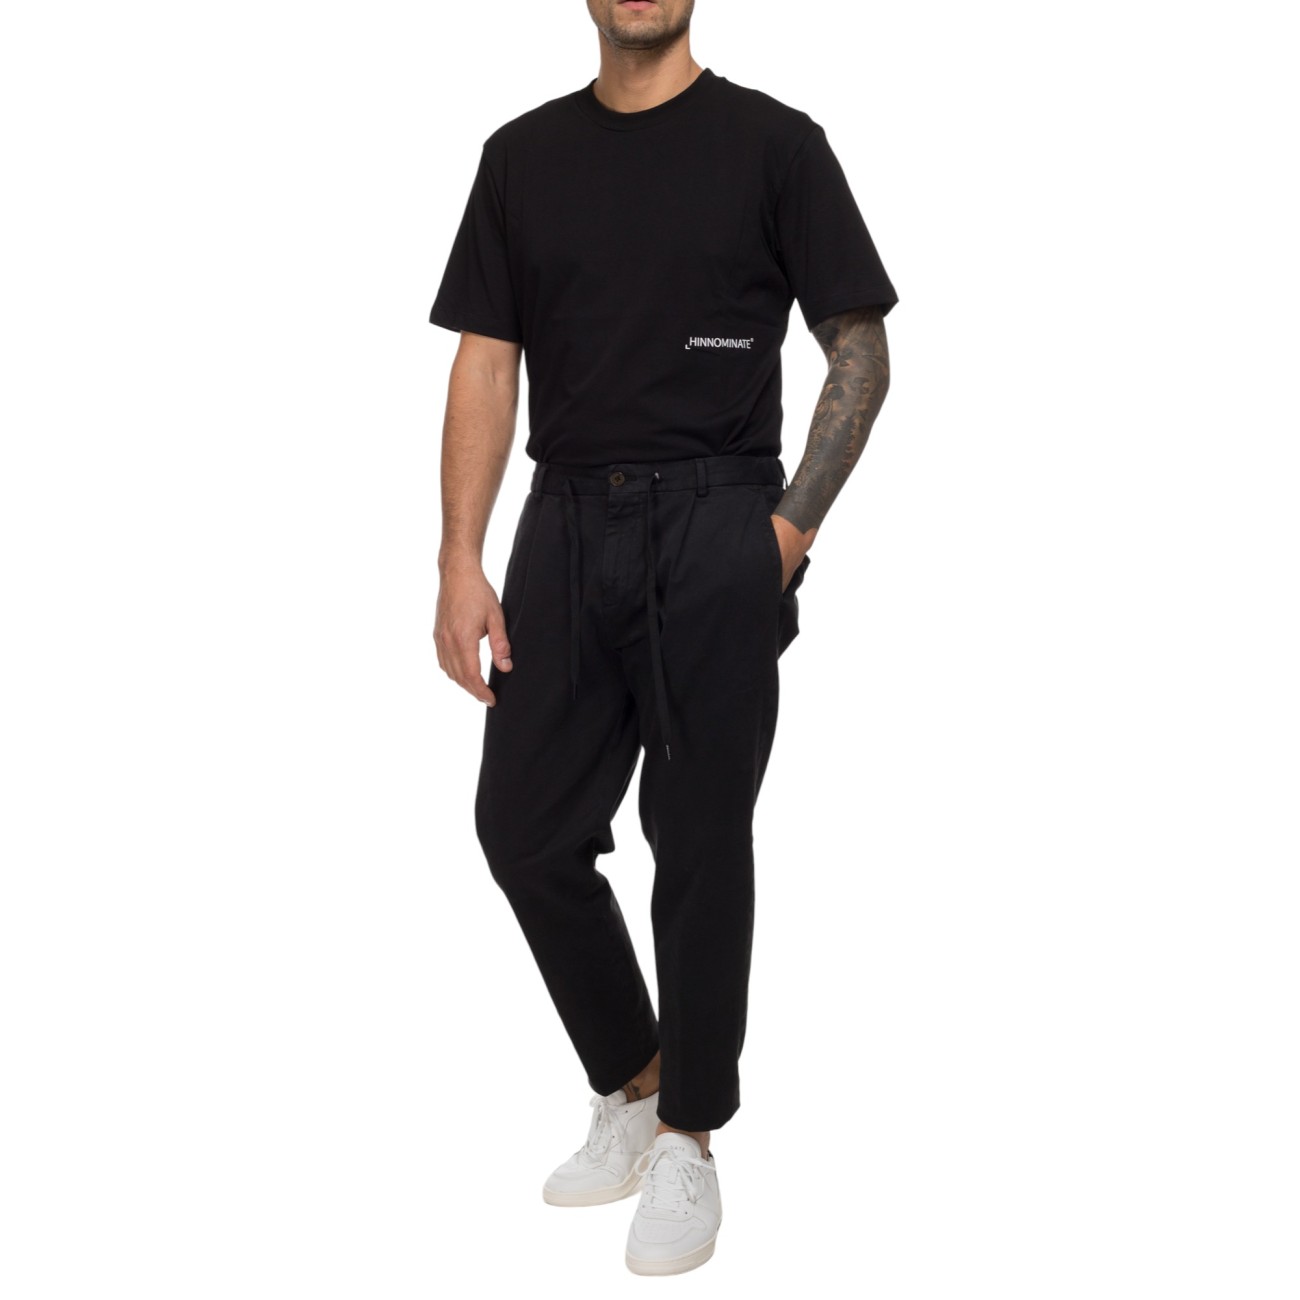 Black chino trousers outfit